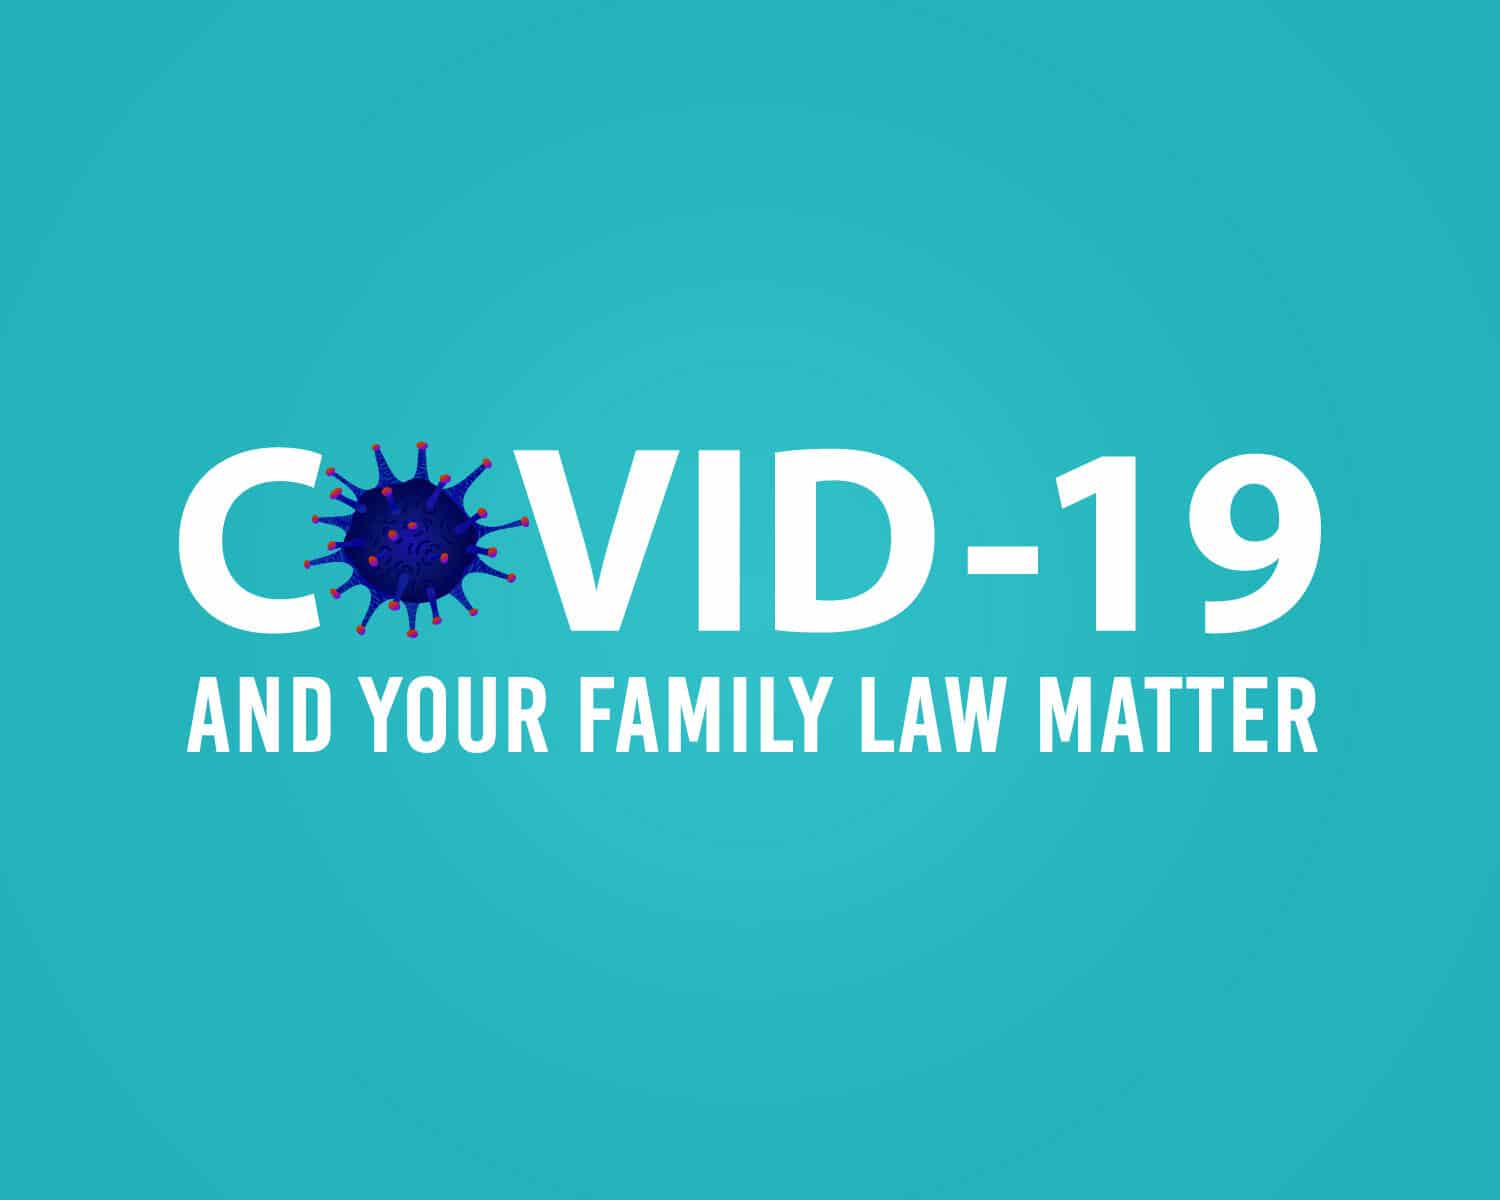 COVID-19 and your family law matter in Virginia